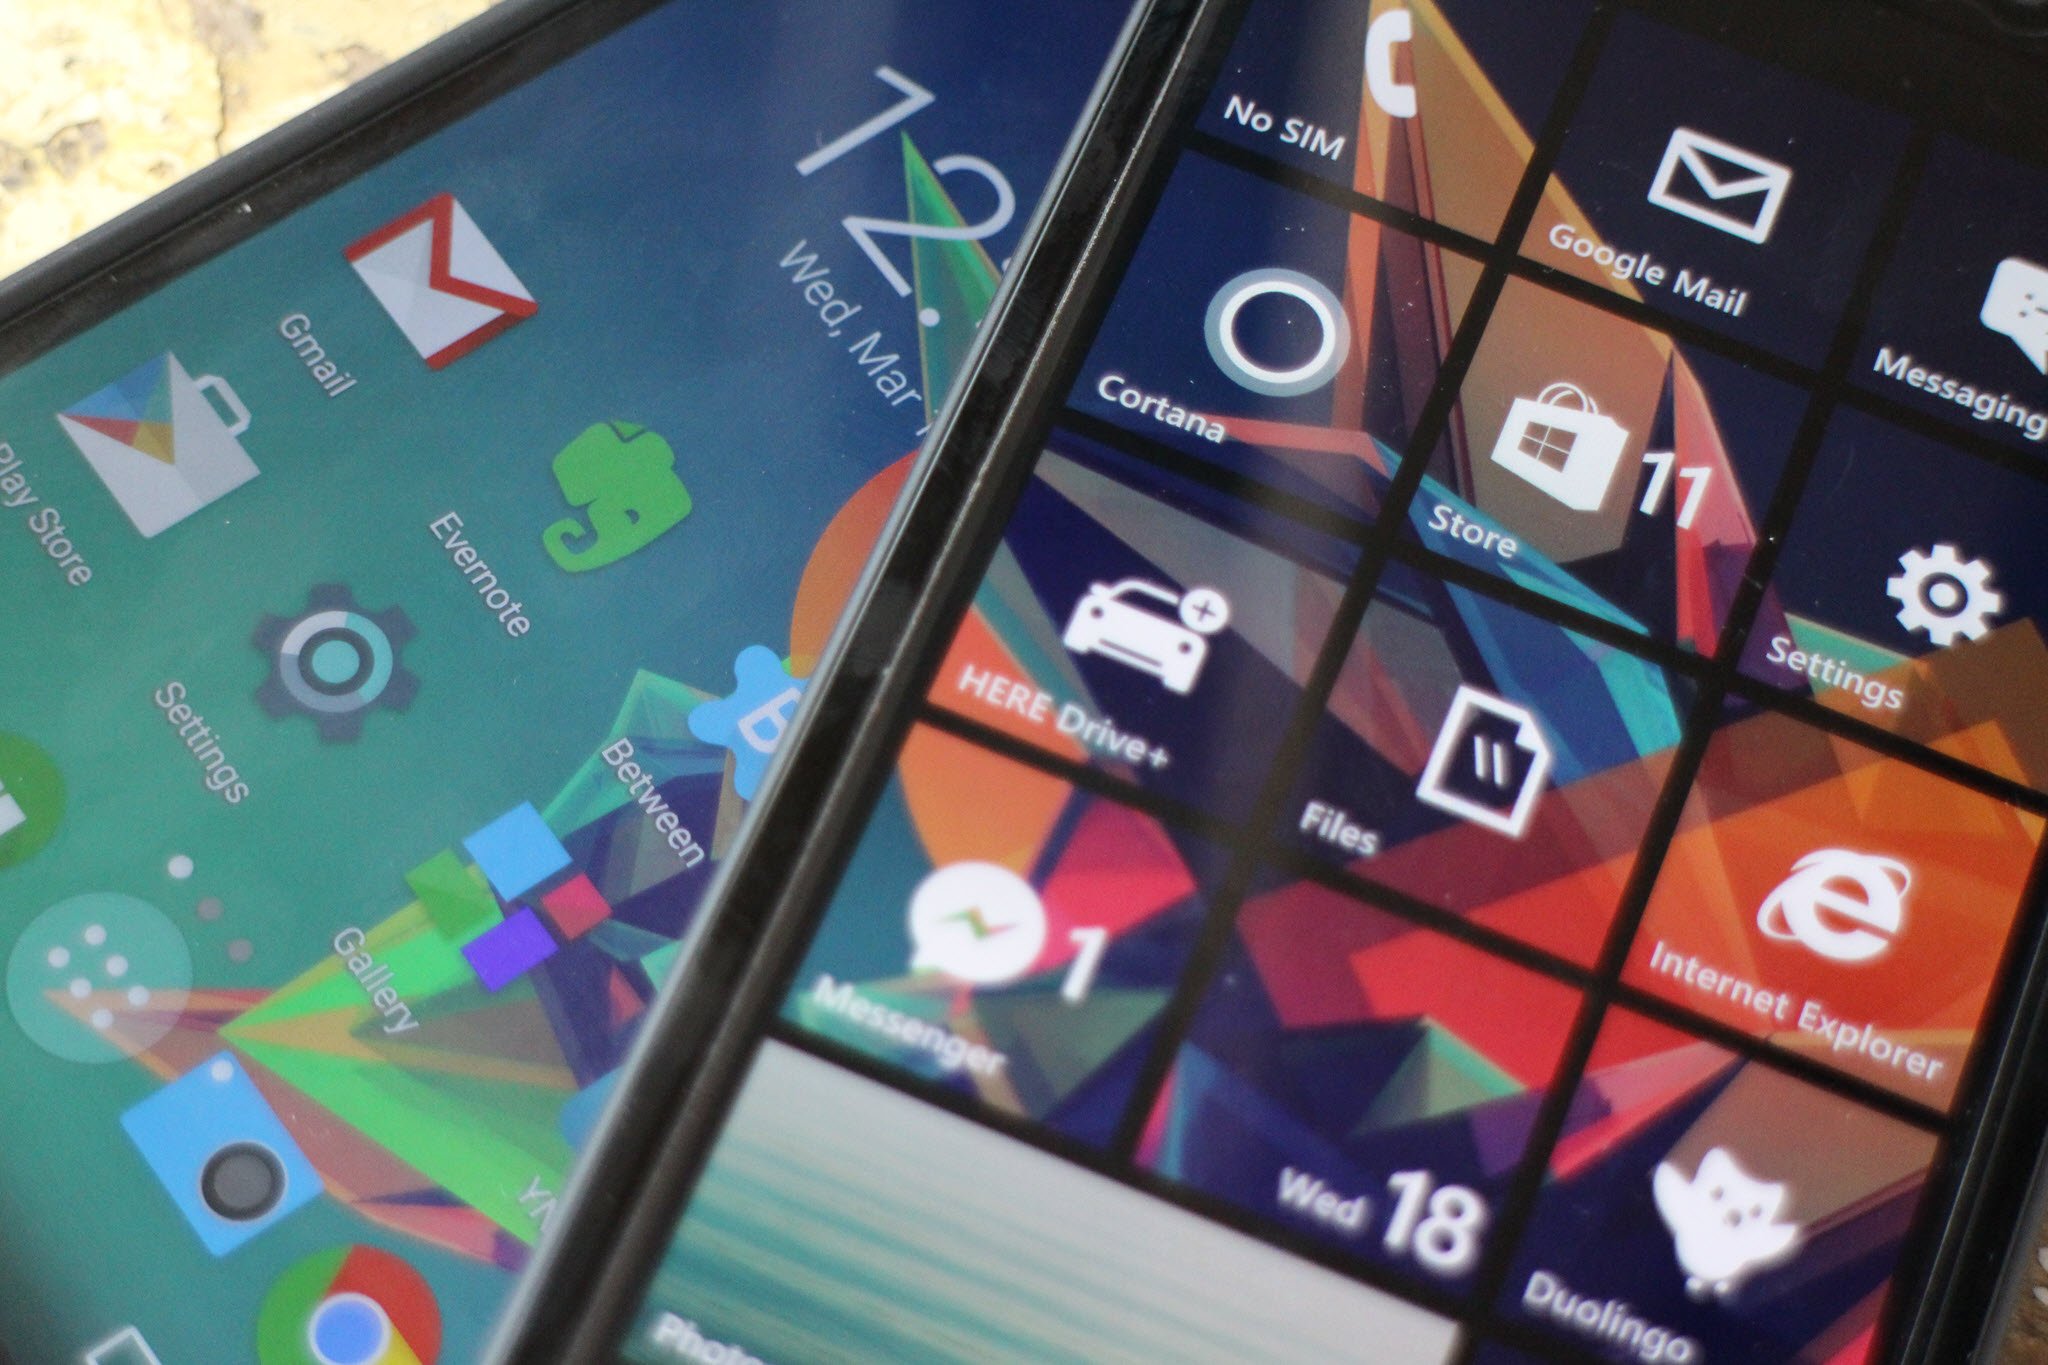 Microsoft is making a ROM that allows Android smartphones to run